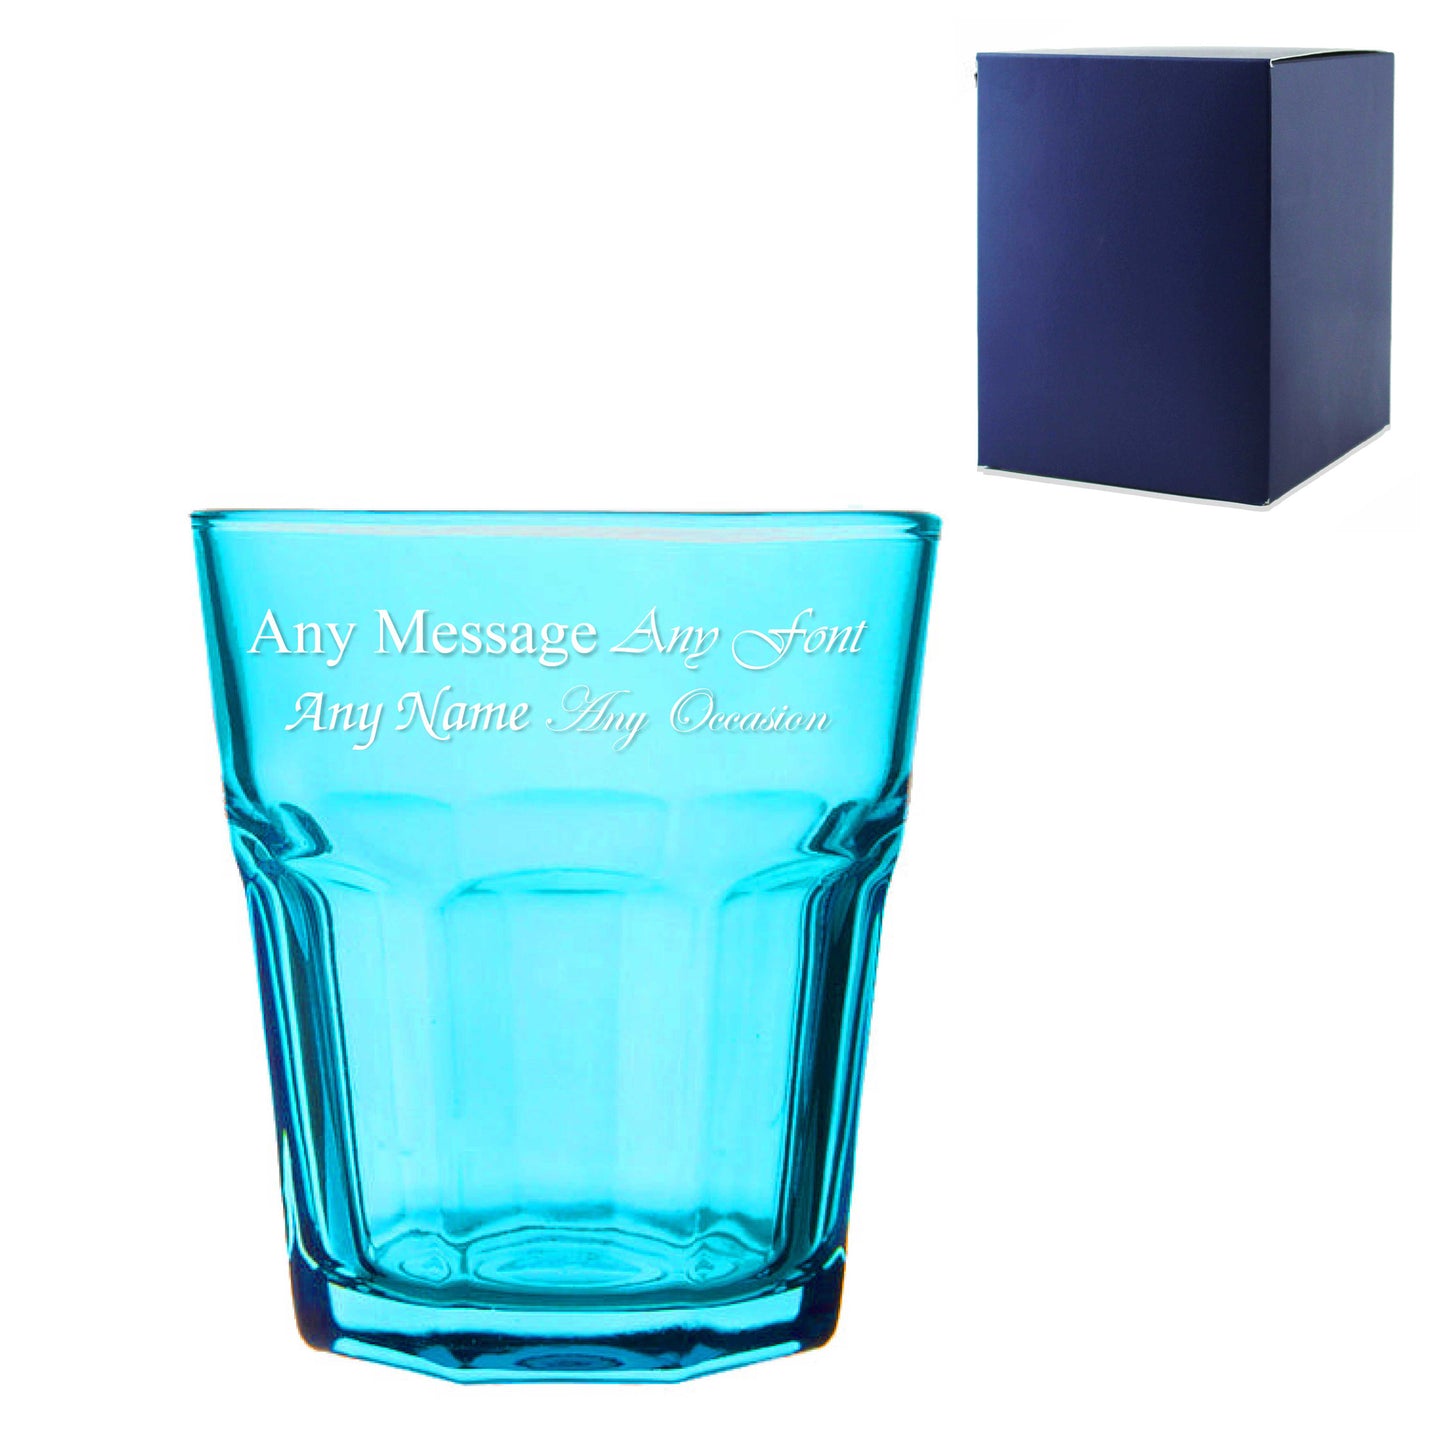 Engraved 305ml Blue Coloured Water Glass with Gift Box Image 2